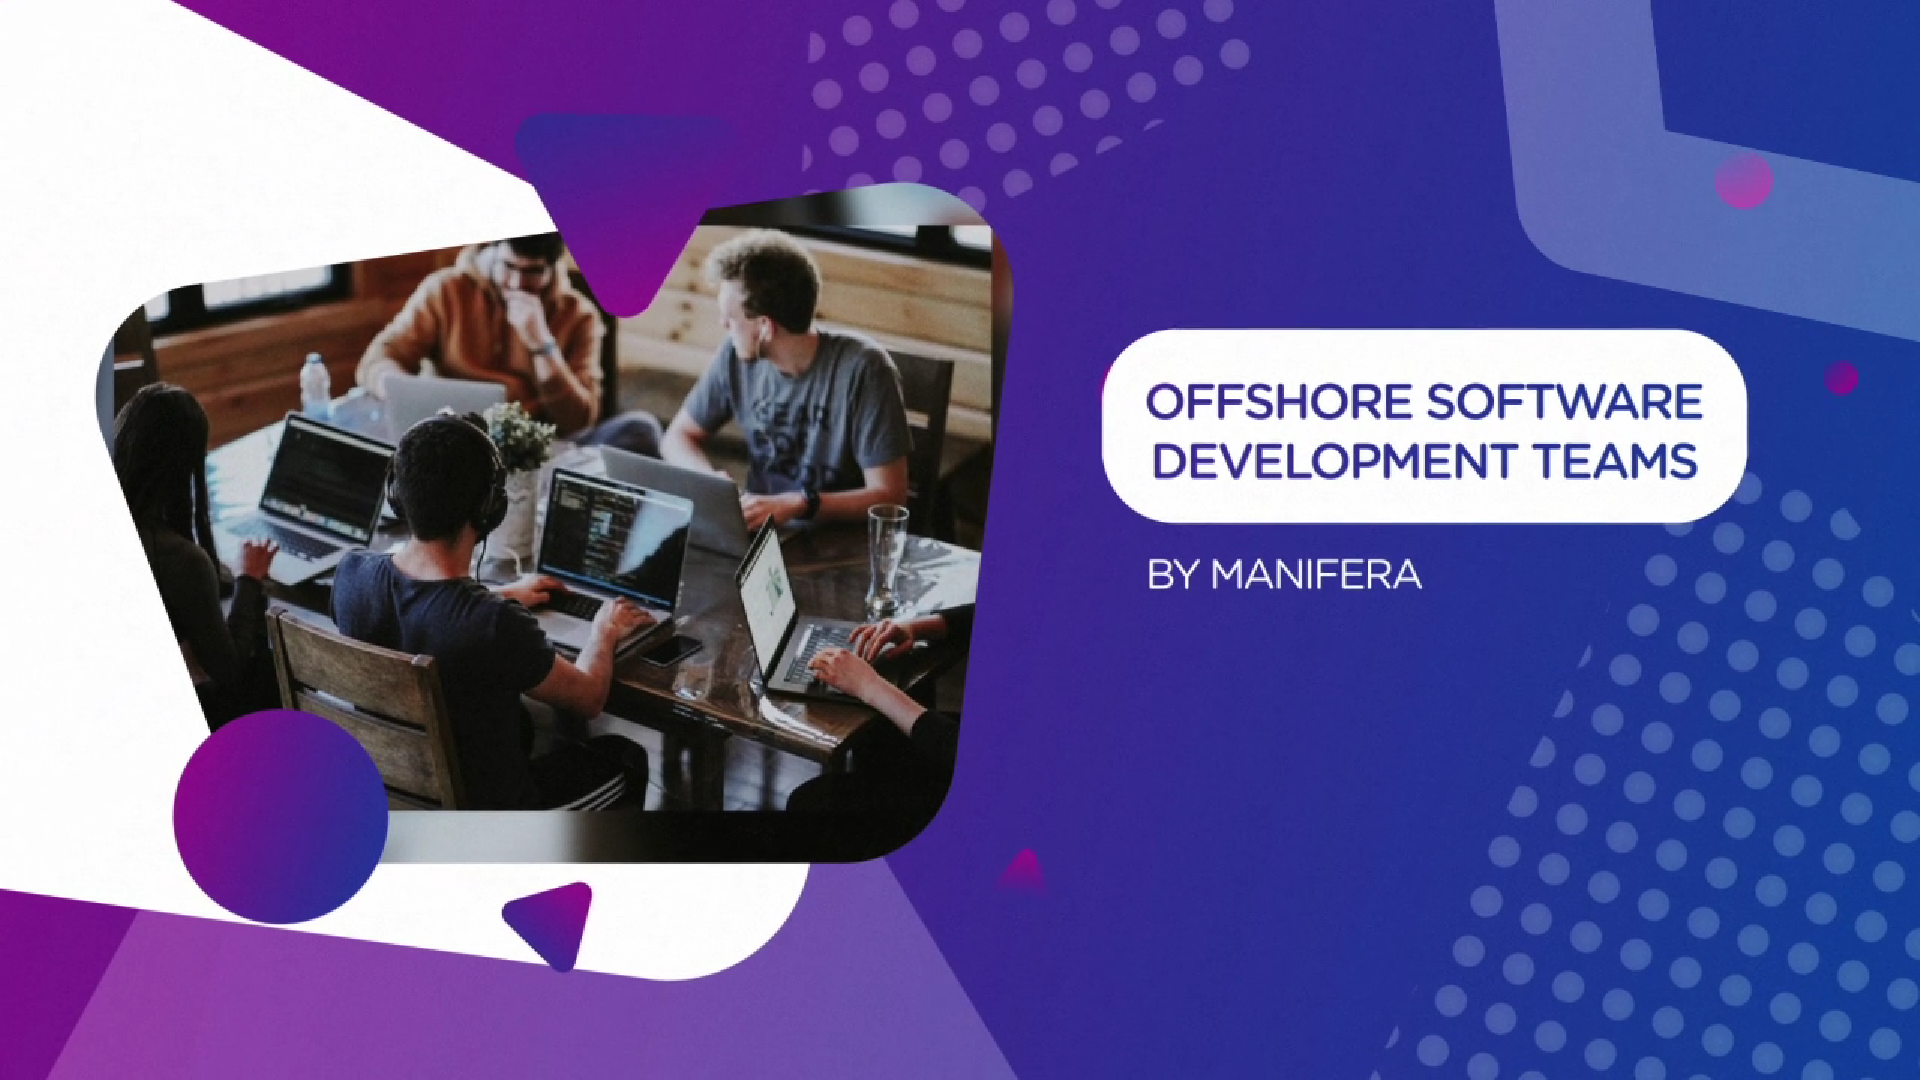 Building an Offshore Software Development Team for your business?